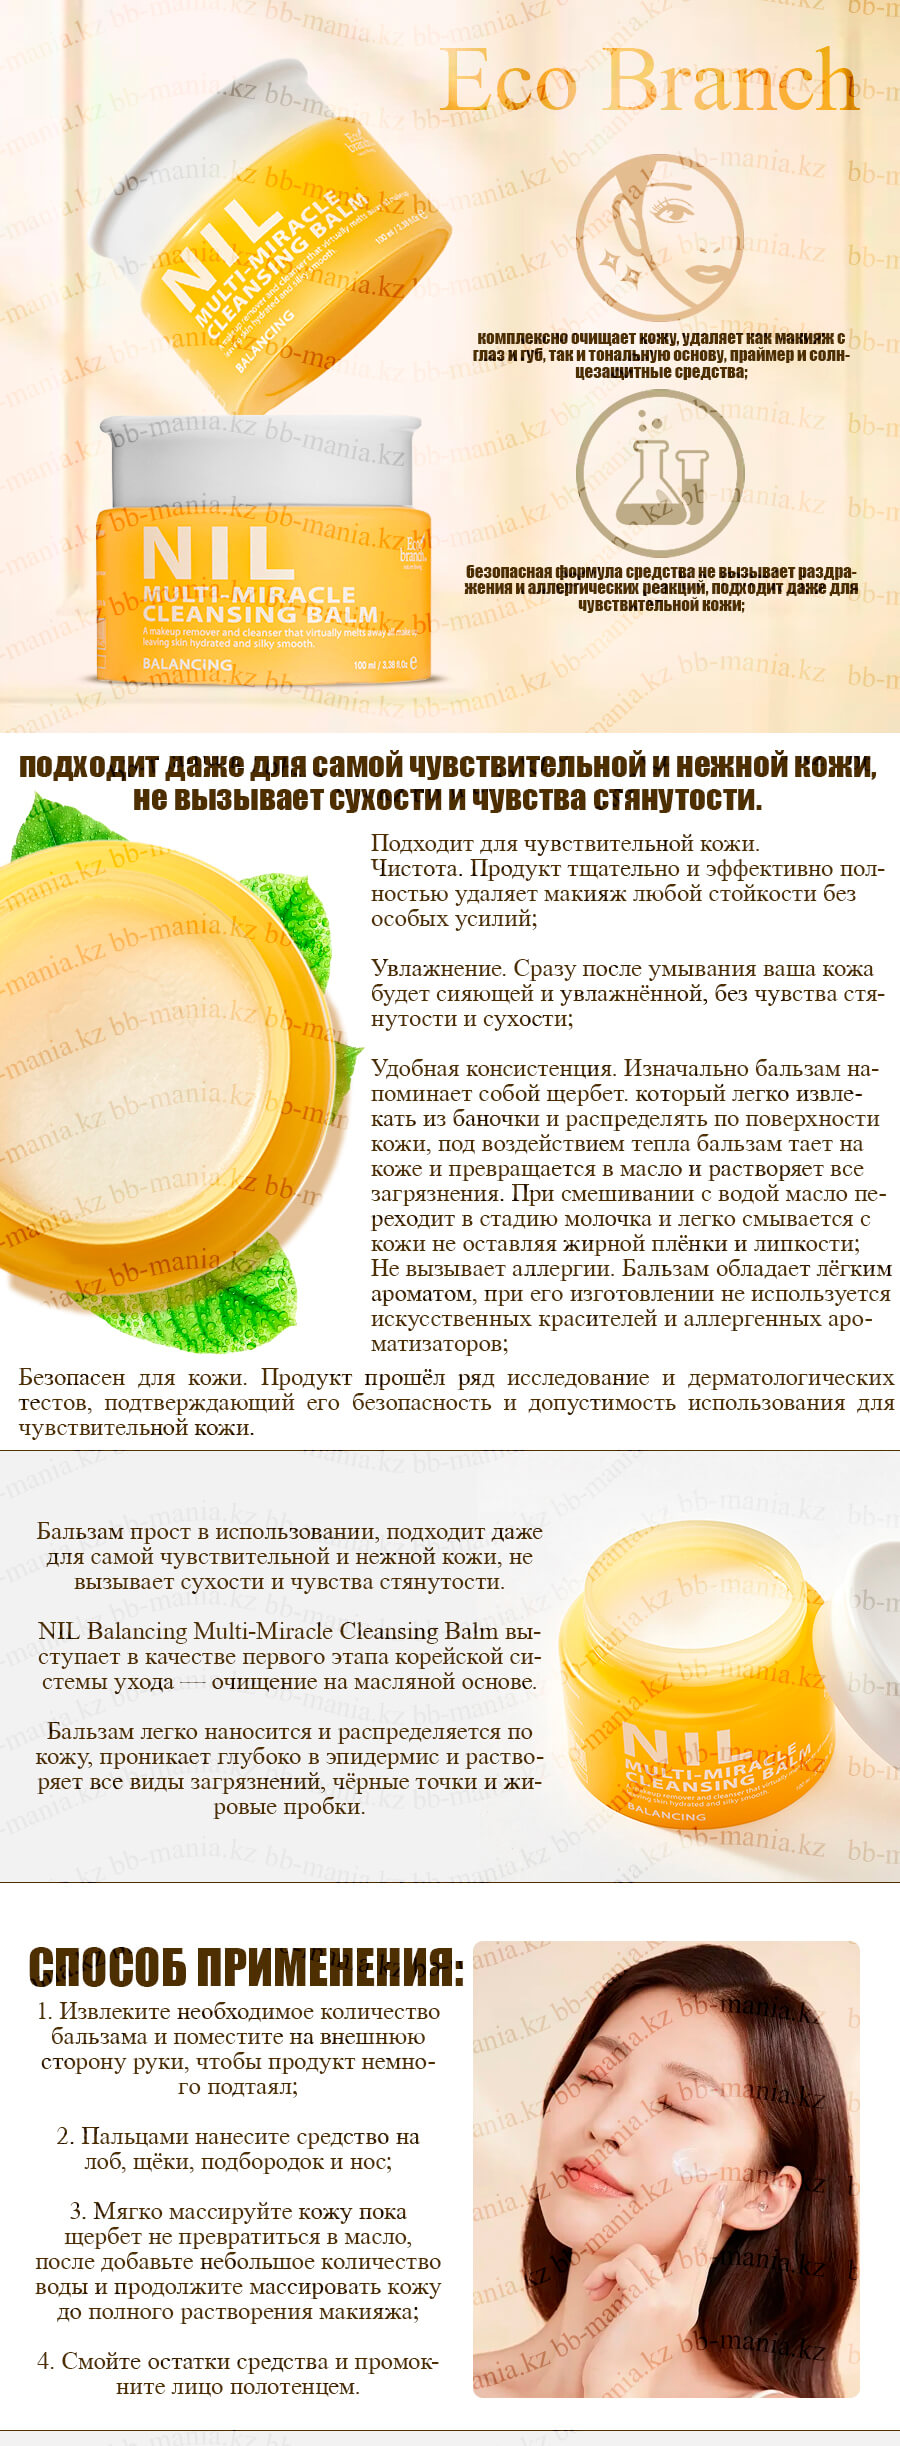 nil_balancing_multimiracle_cleansing_balm_eco_branch